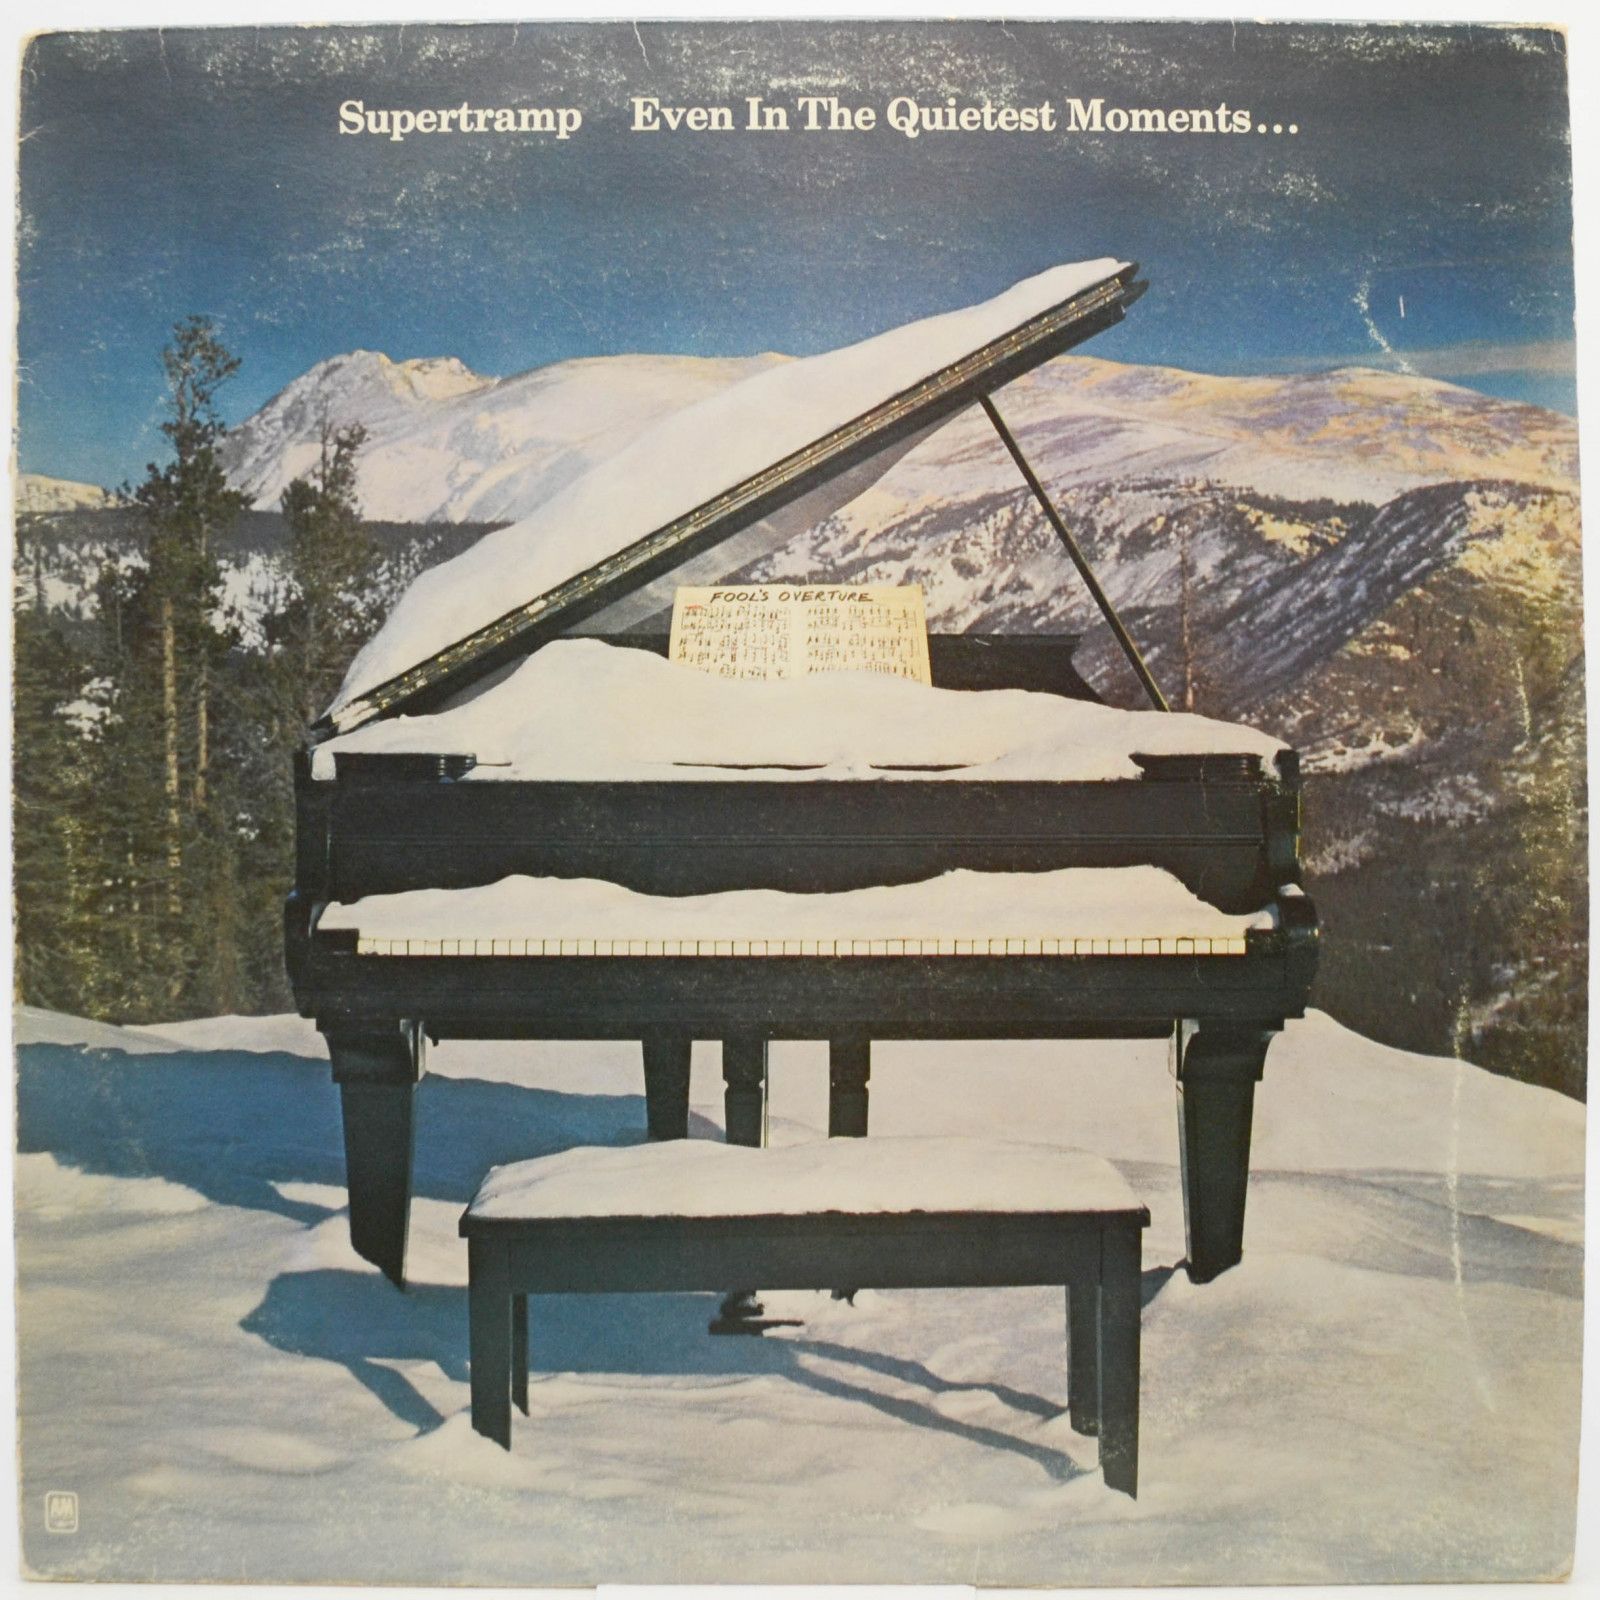 Supertramp — Even In The Quietest Moments..., 1977